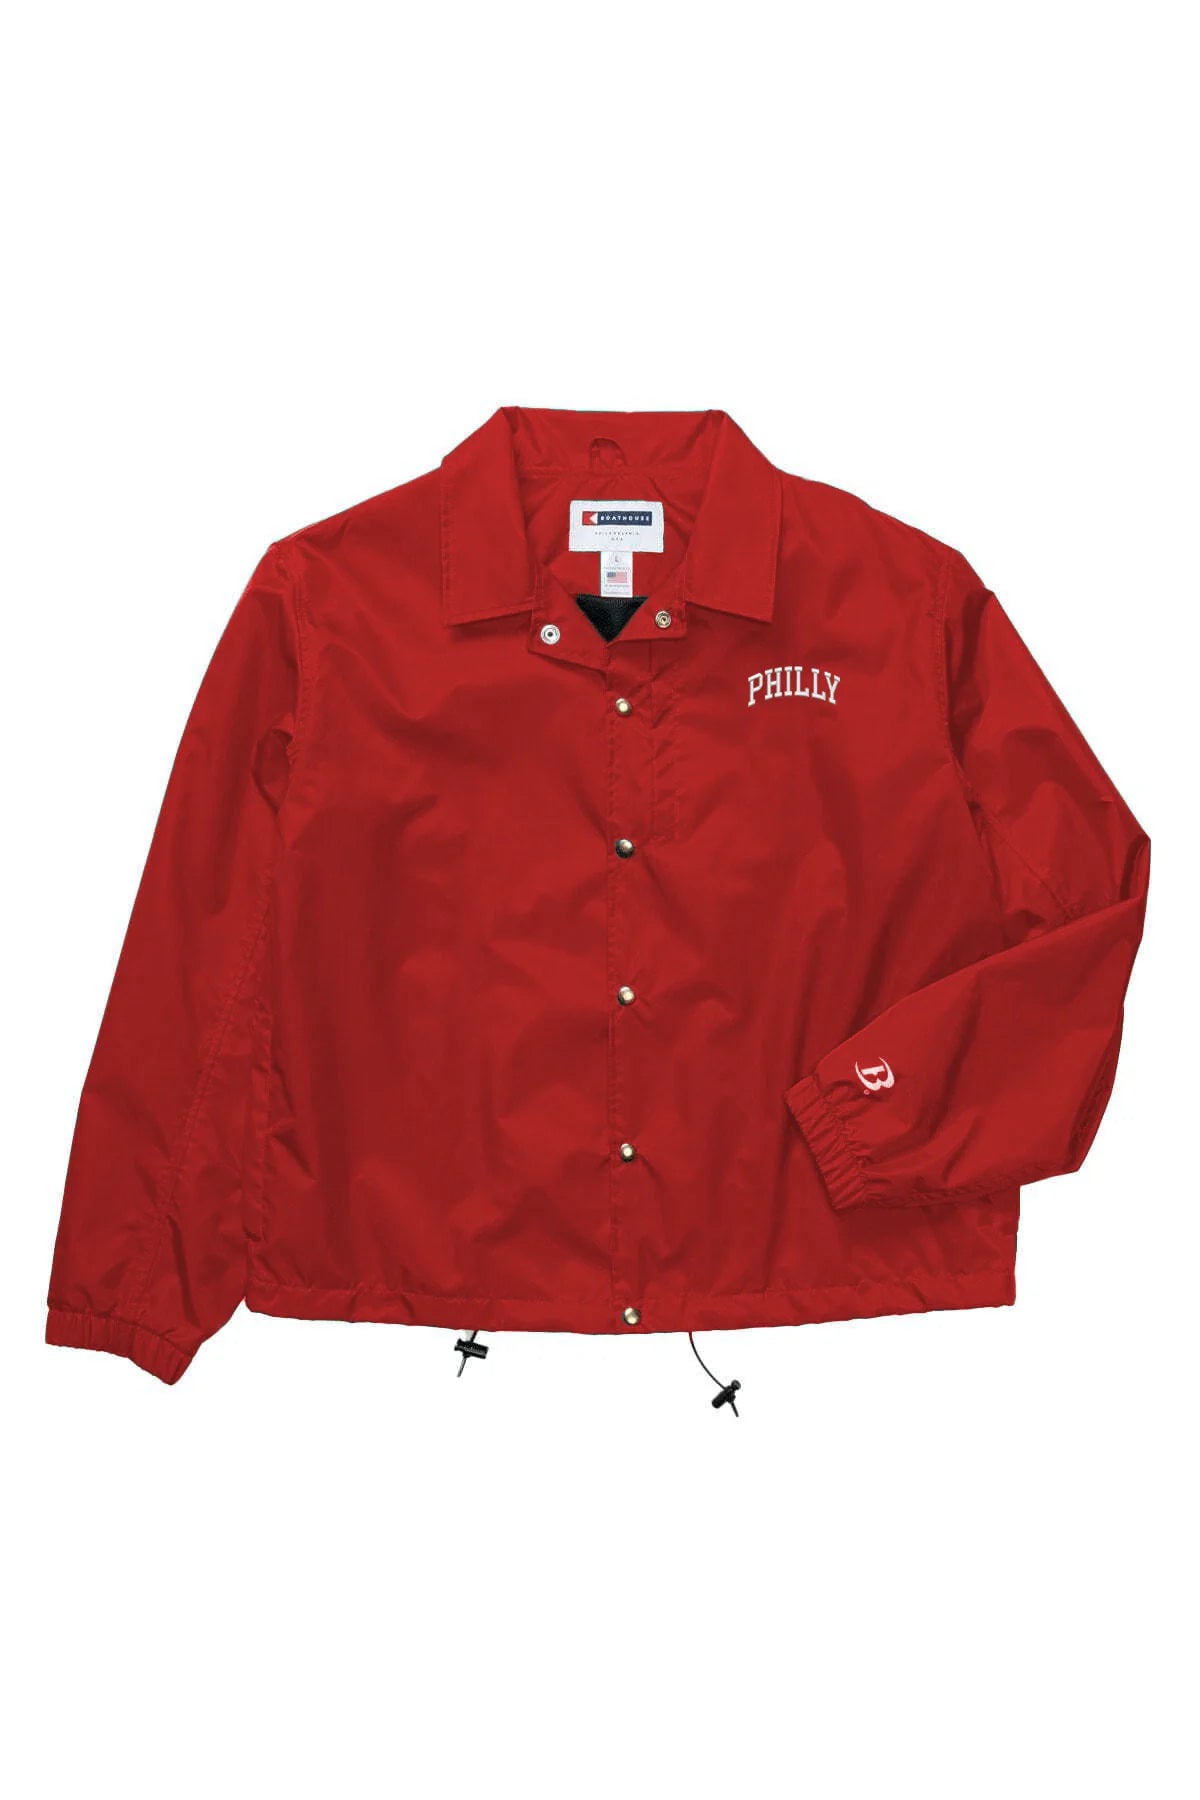 Philly Coaches Jacket